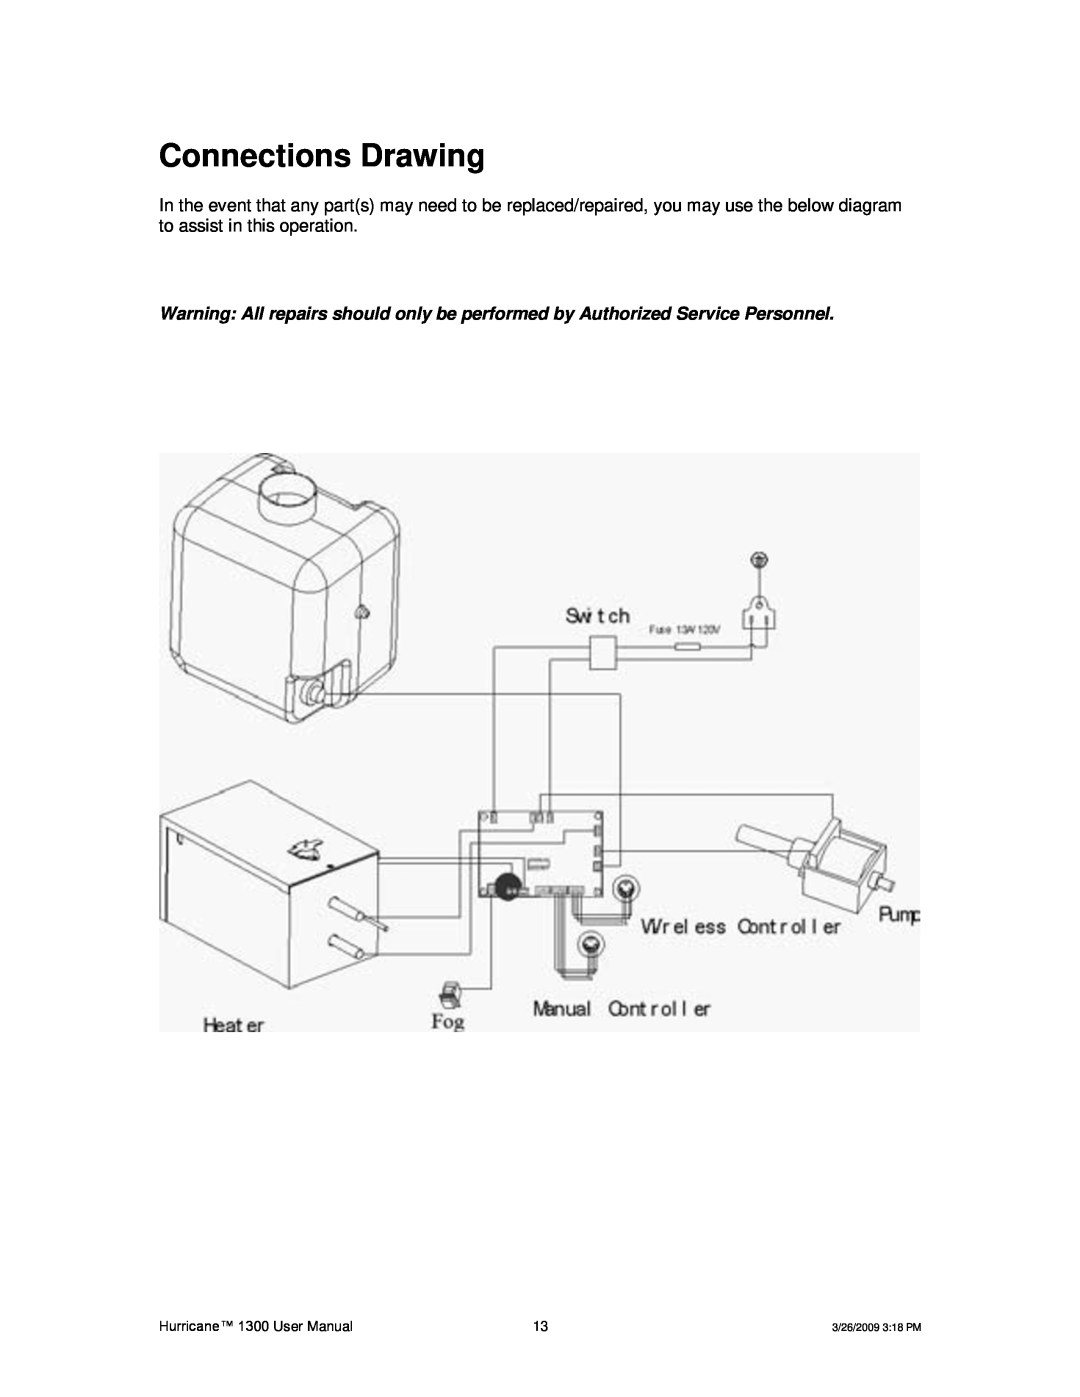 Chauvet Hurricane 1300 user manual Connections Drawing 